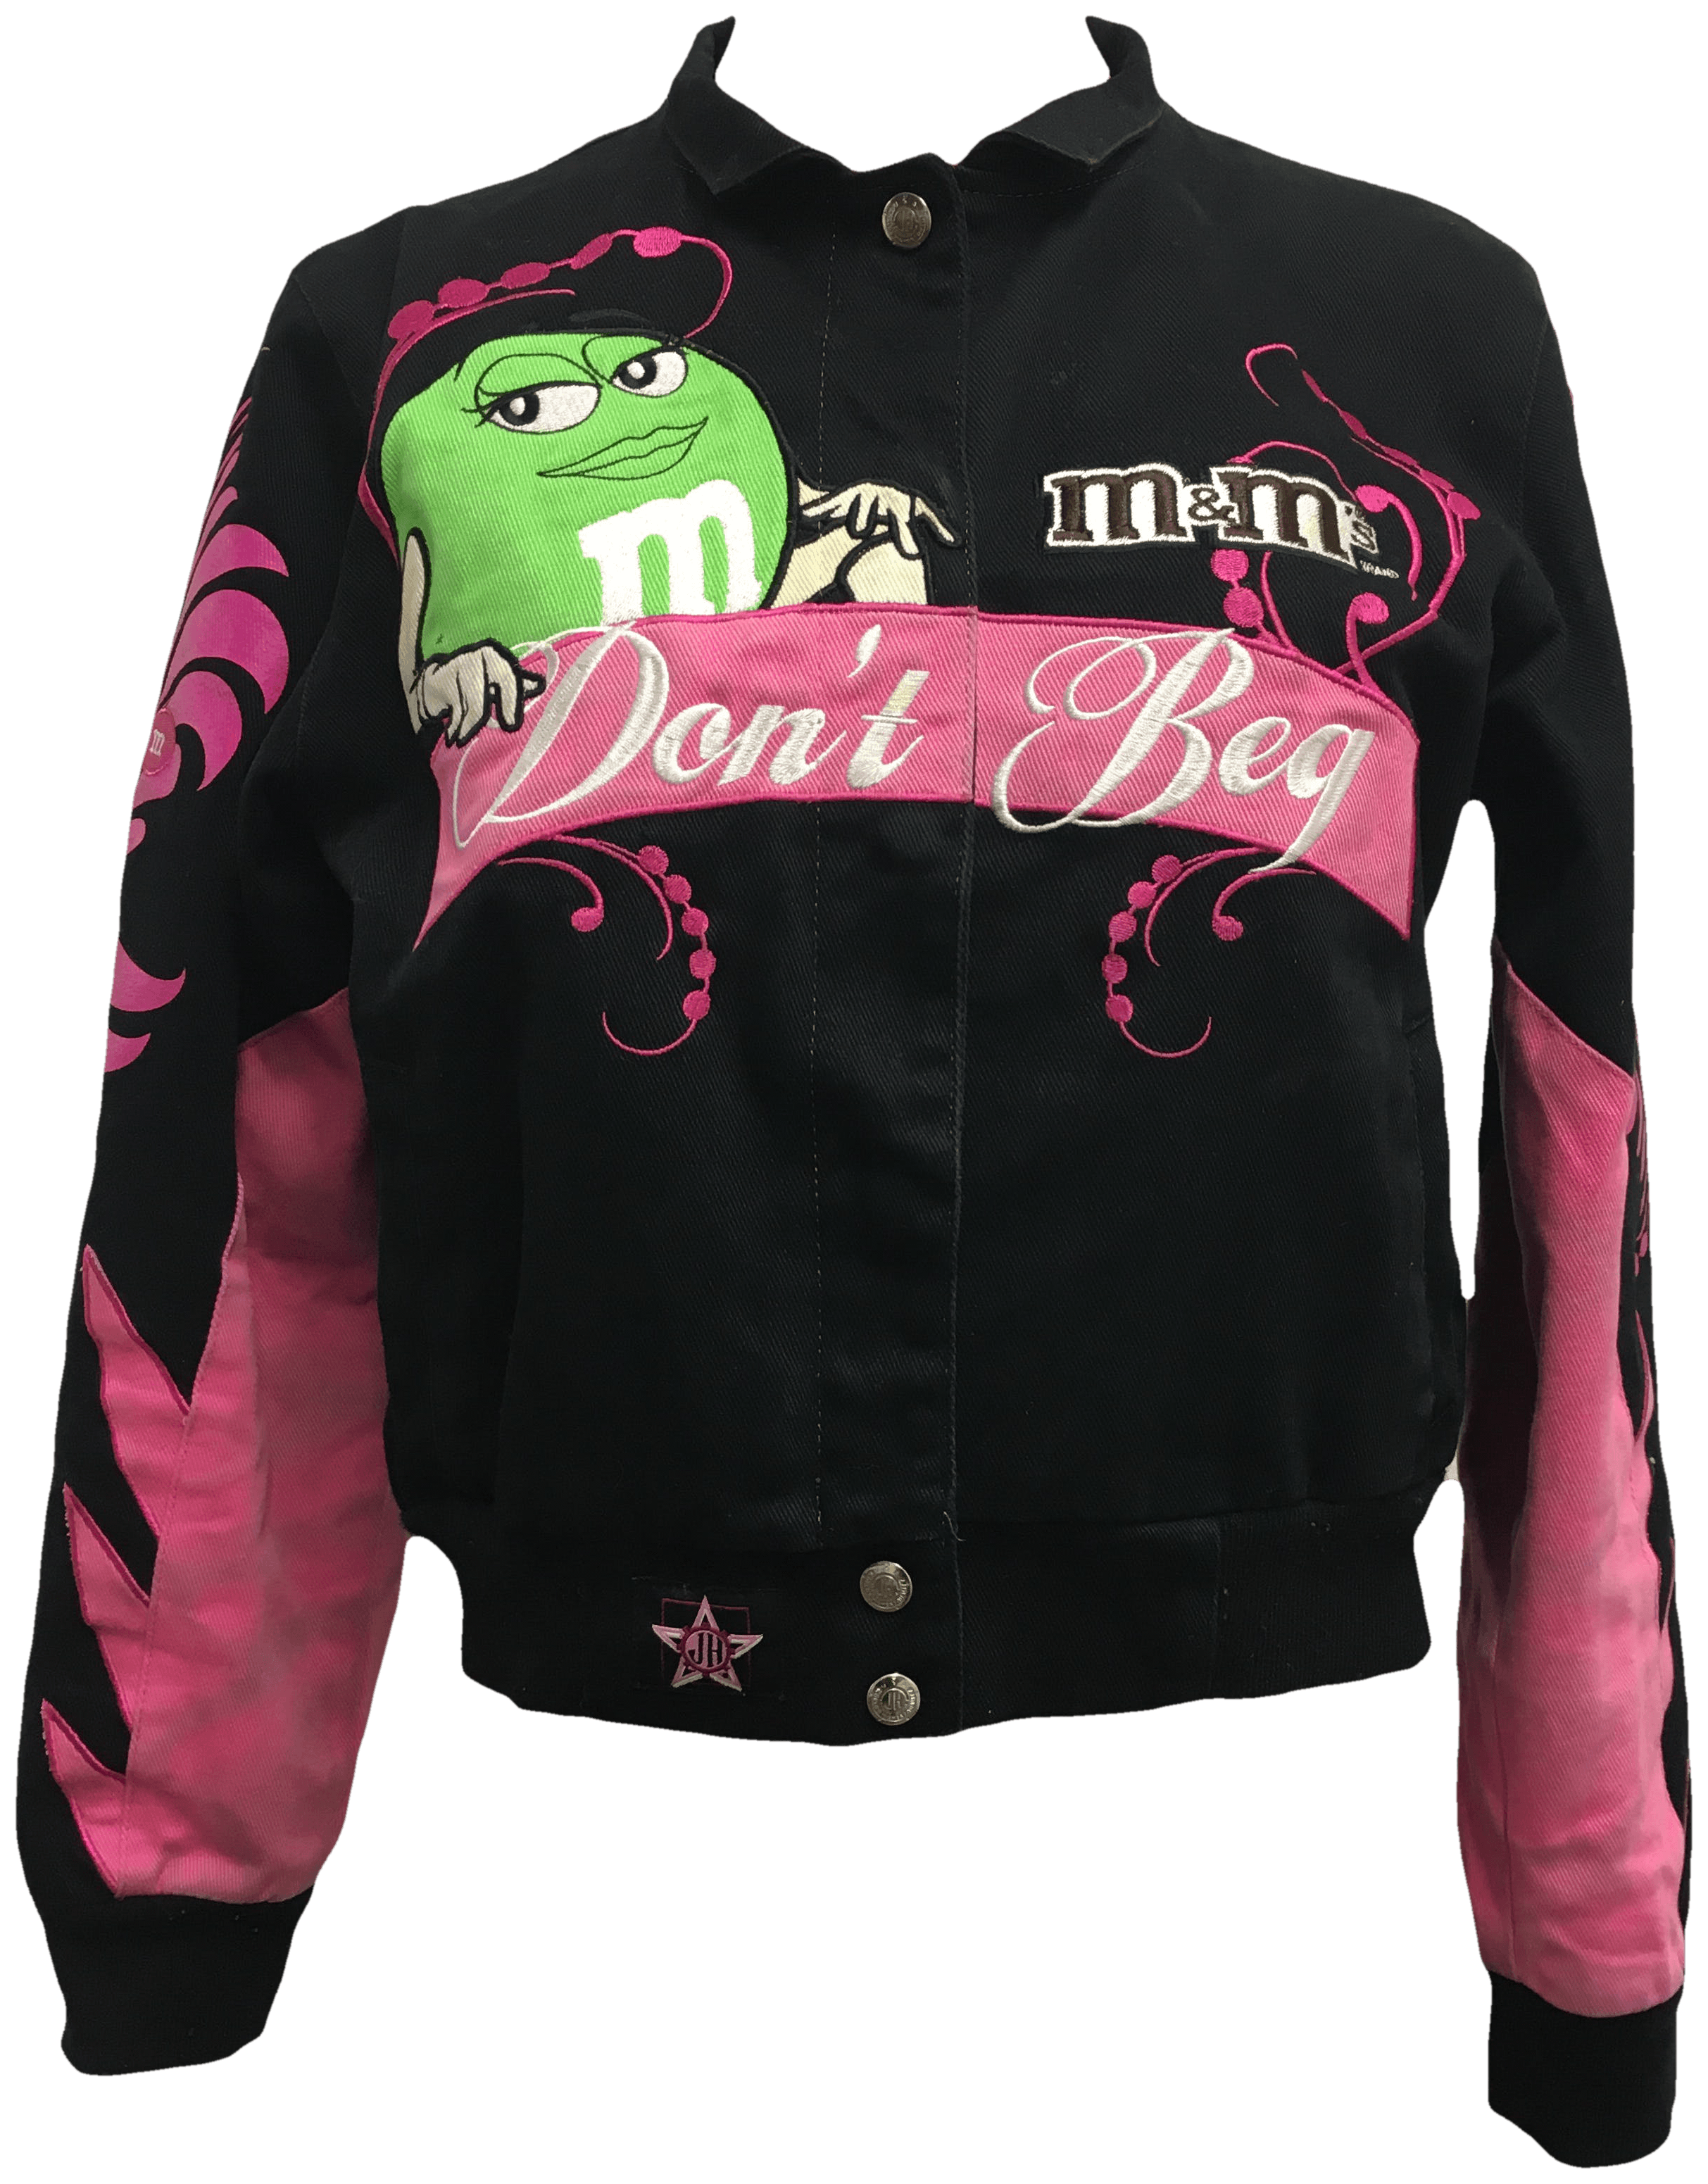 M&M's Racing Jacket by JH Design